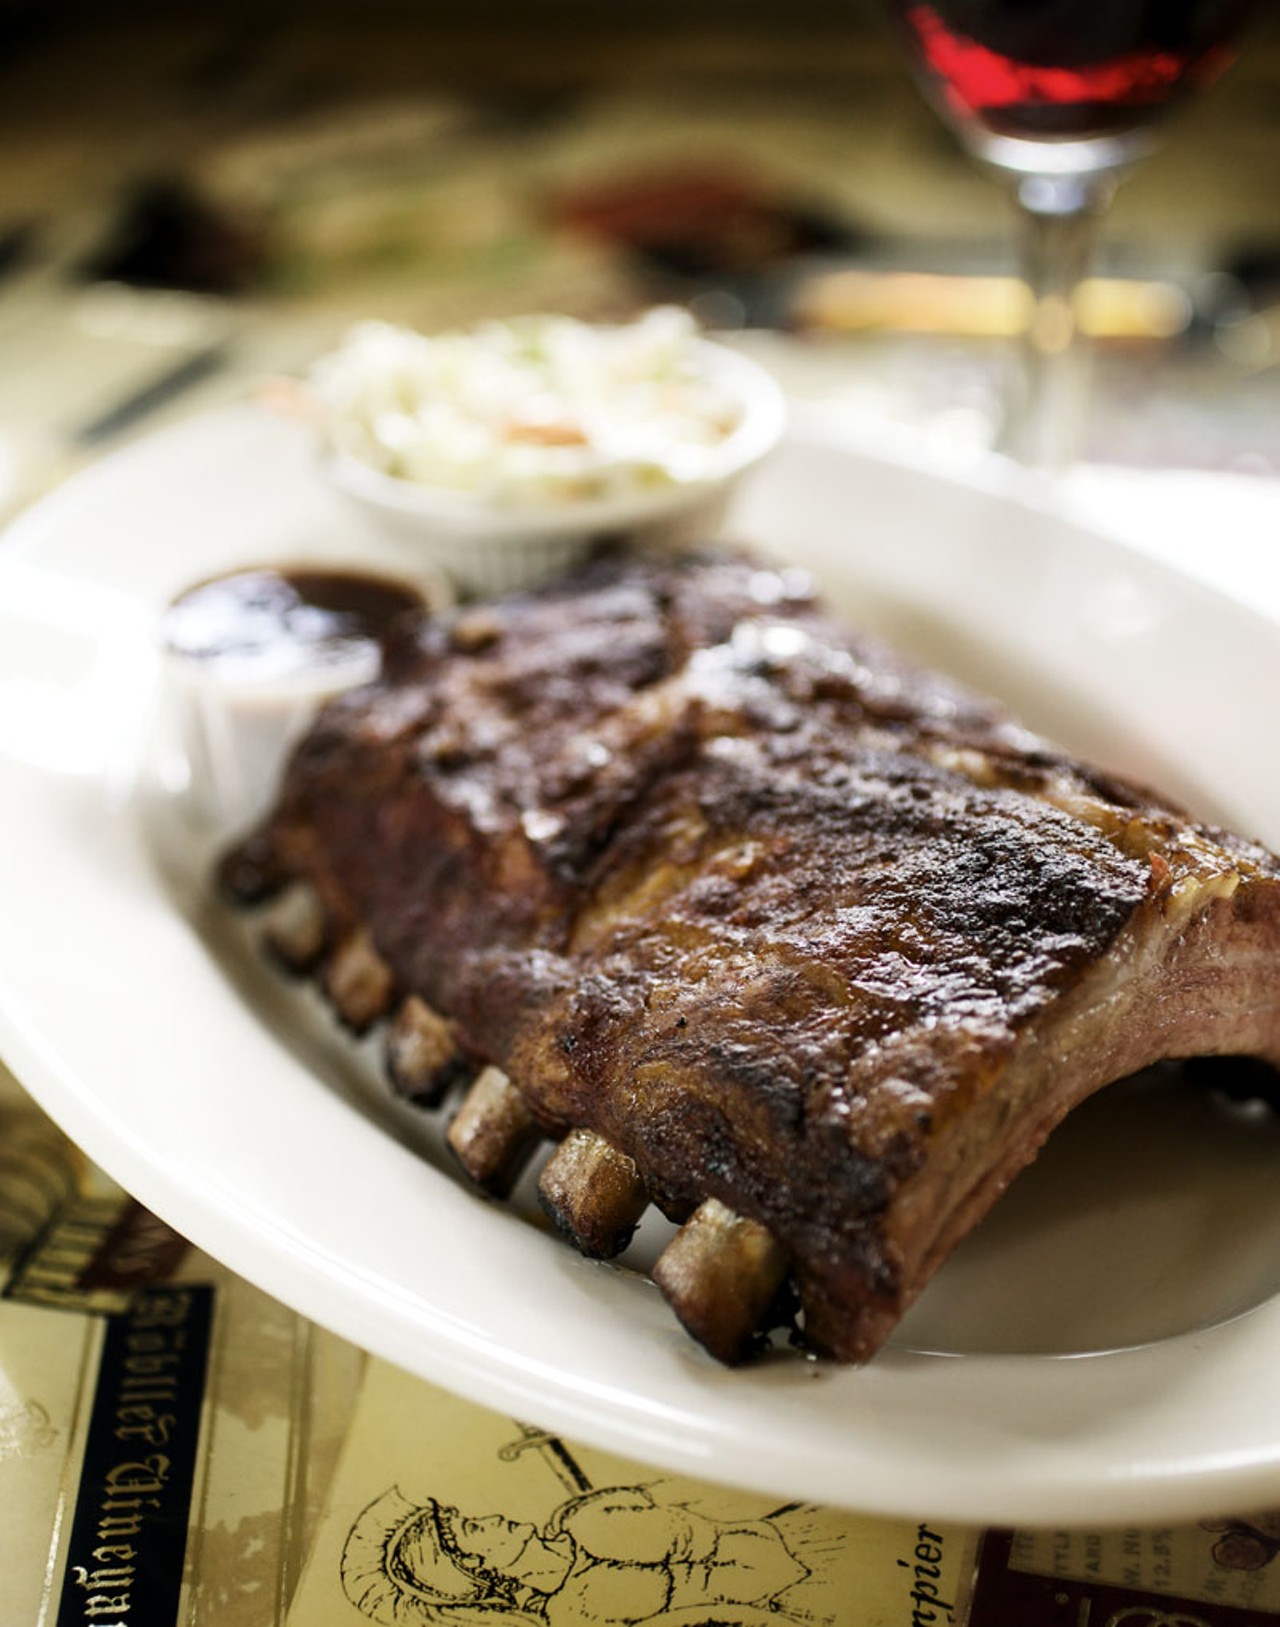 Smoked Baby Back Ribs are actually not on the menu, but a regular offering at The Piccadilly.